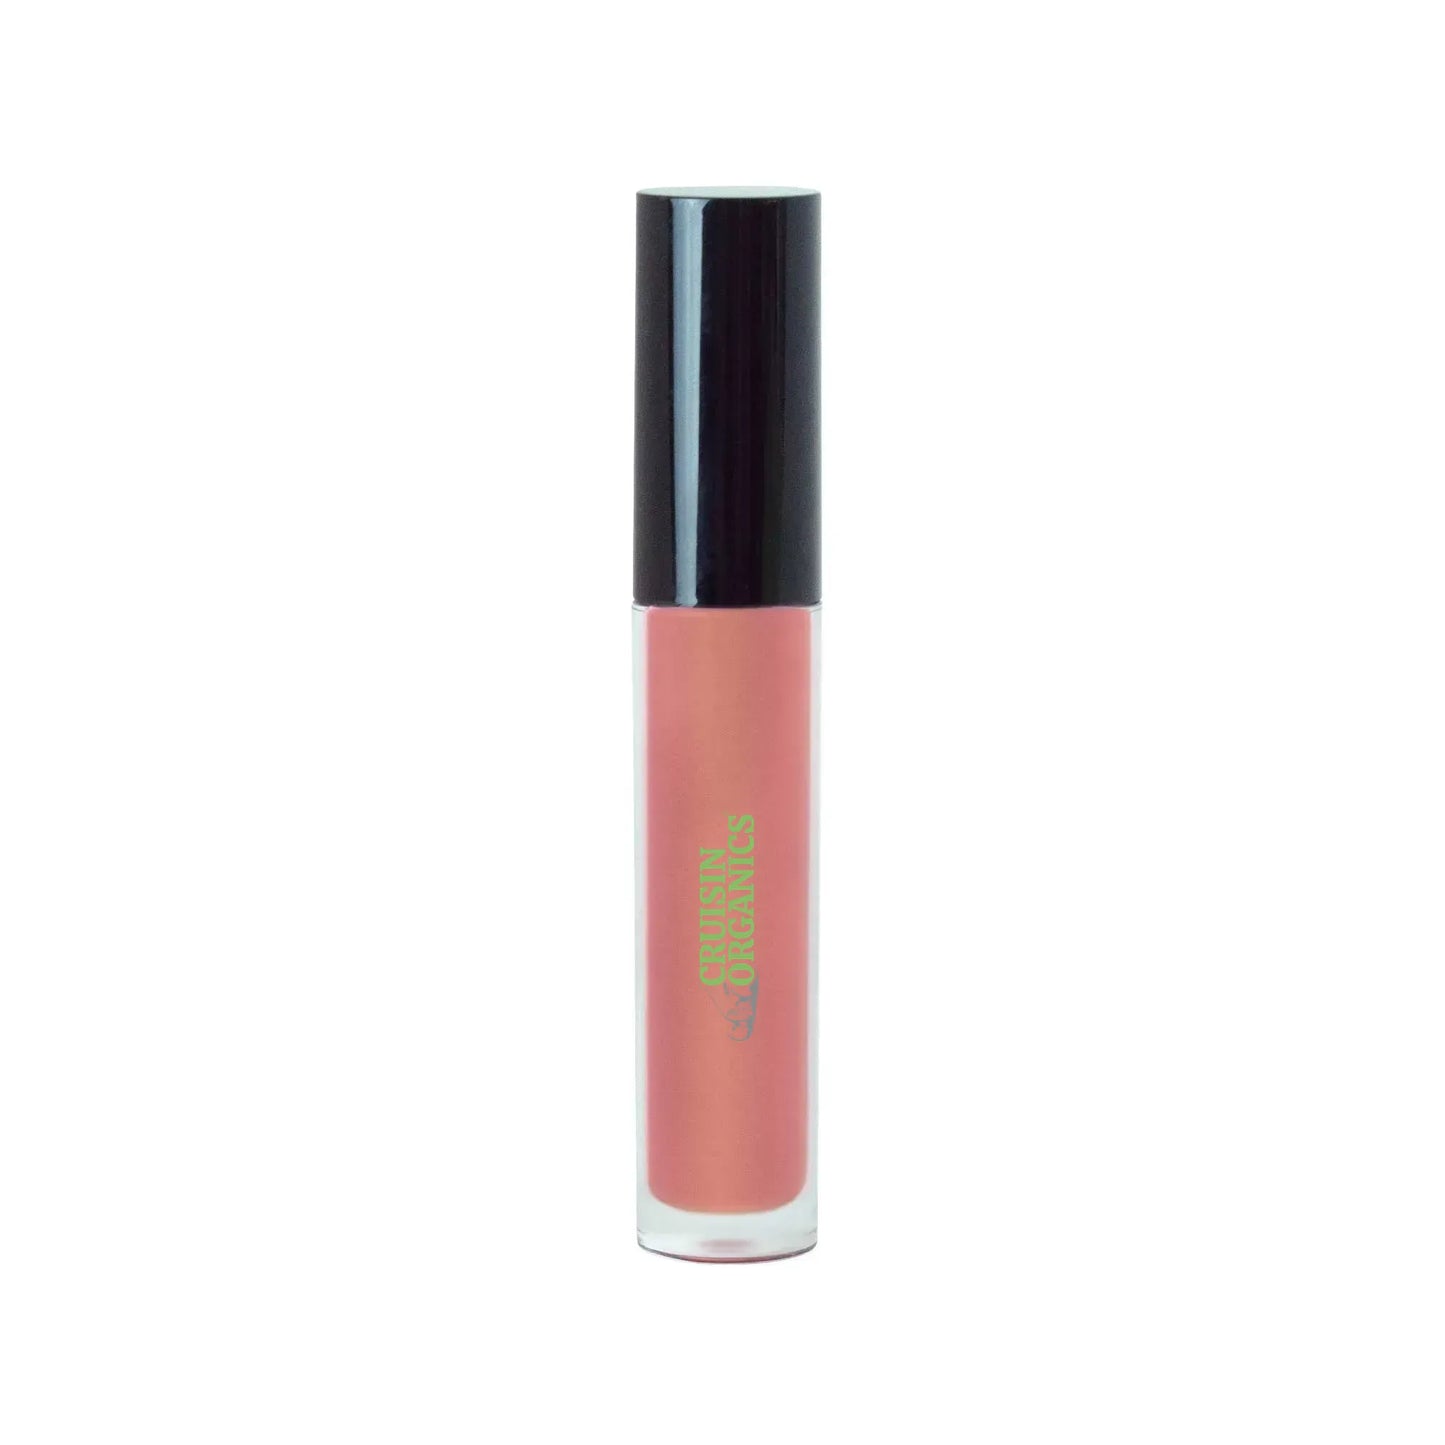 Cruisin Organics Mahogany Lip Gloss Cocoa is a beloved gift for family gatherings, enjoyed by all.